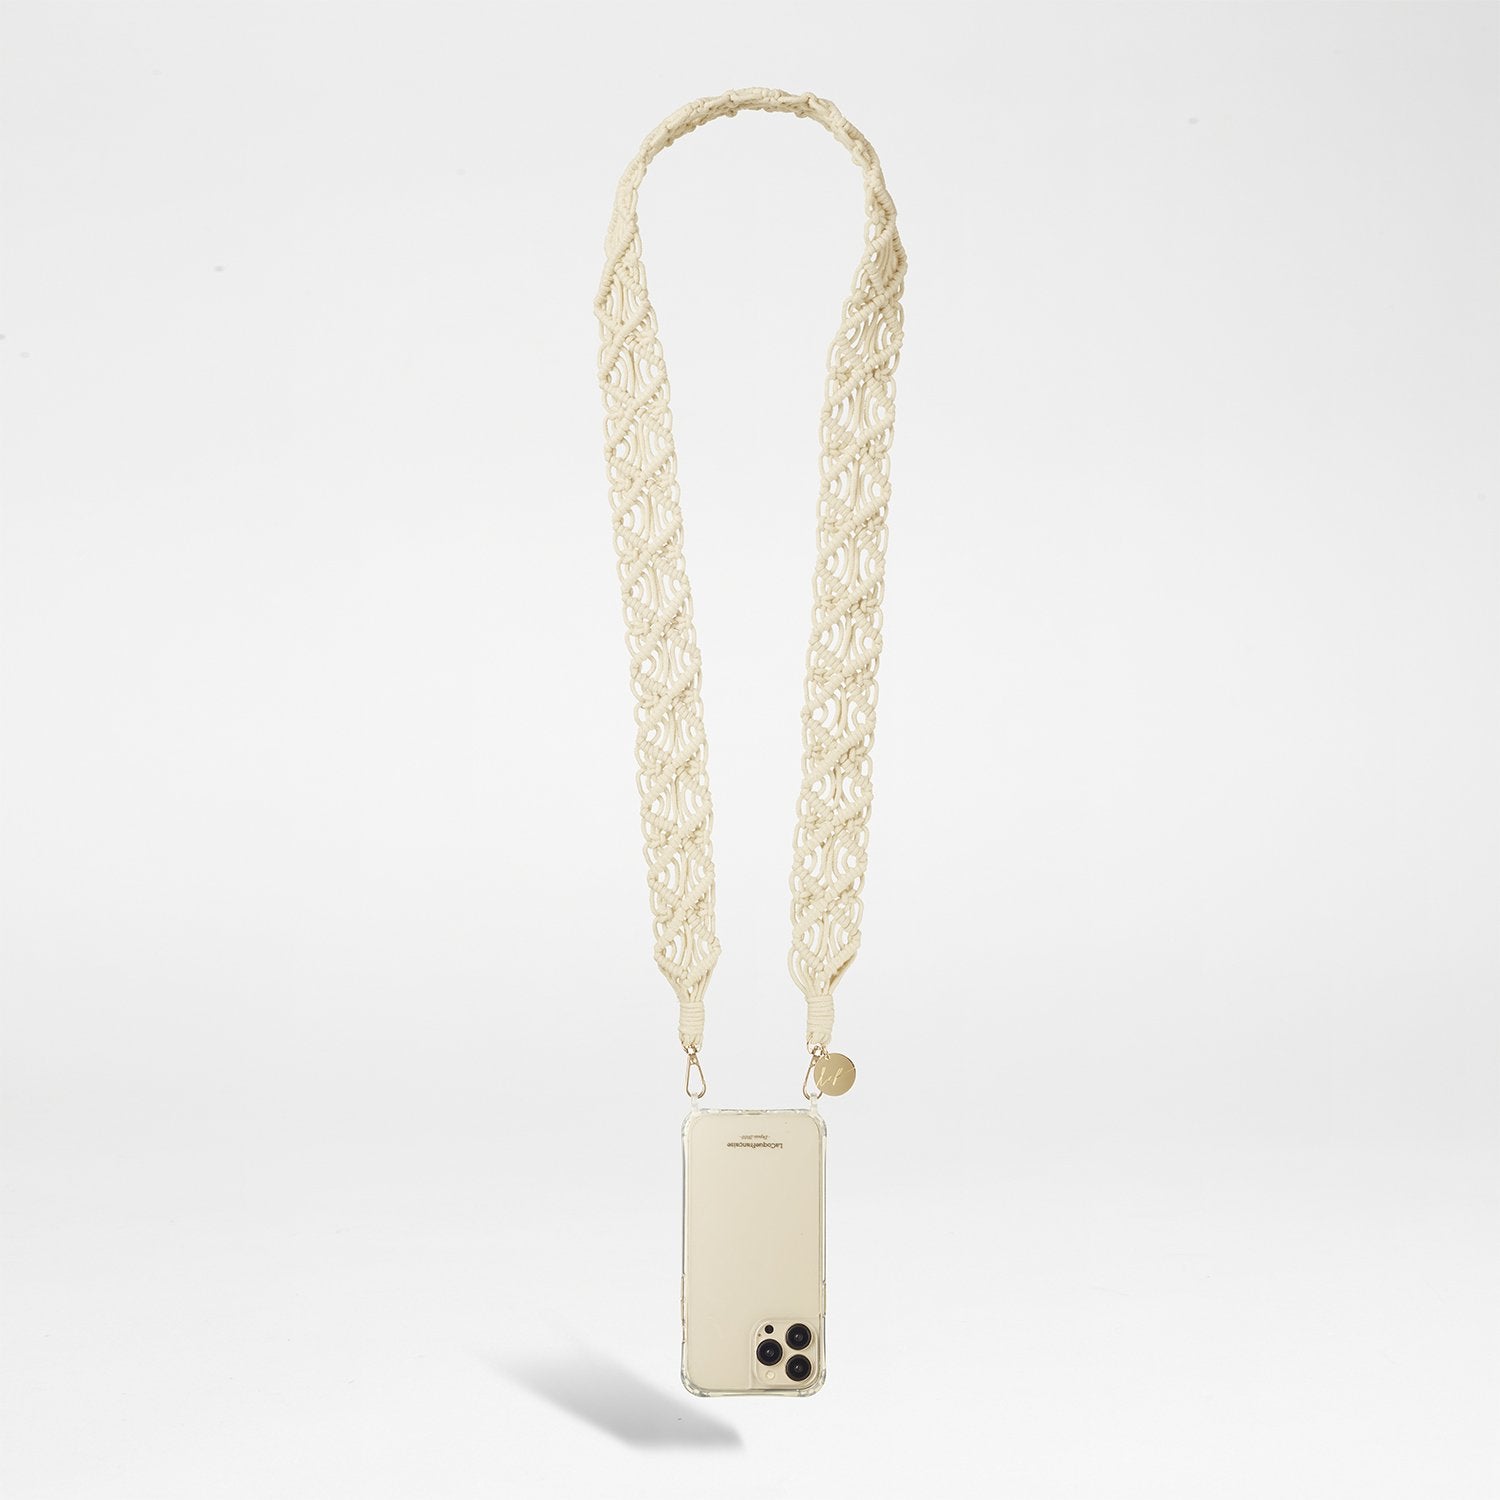 Phone jewelry chains - Smartphone accessories | LaCoqueFrancaise